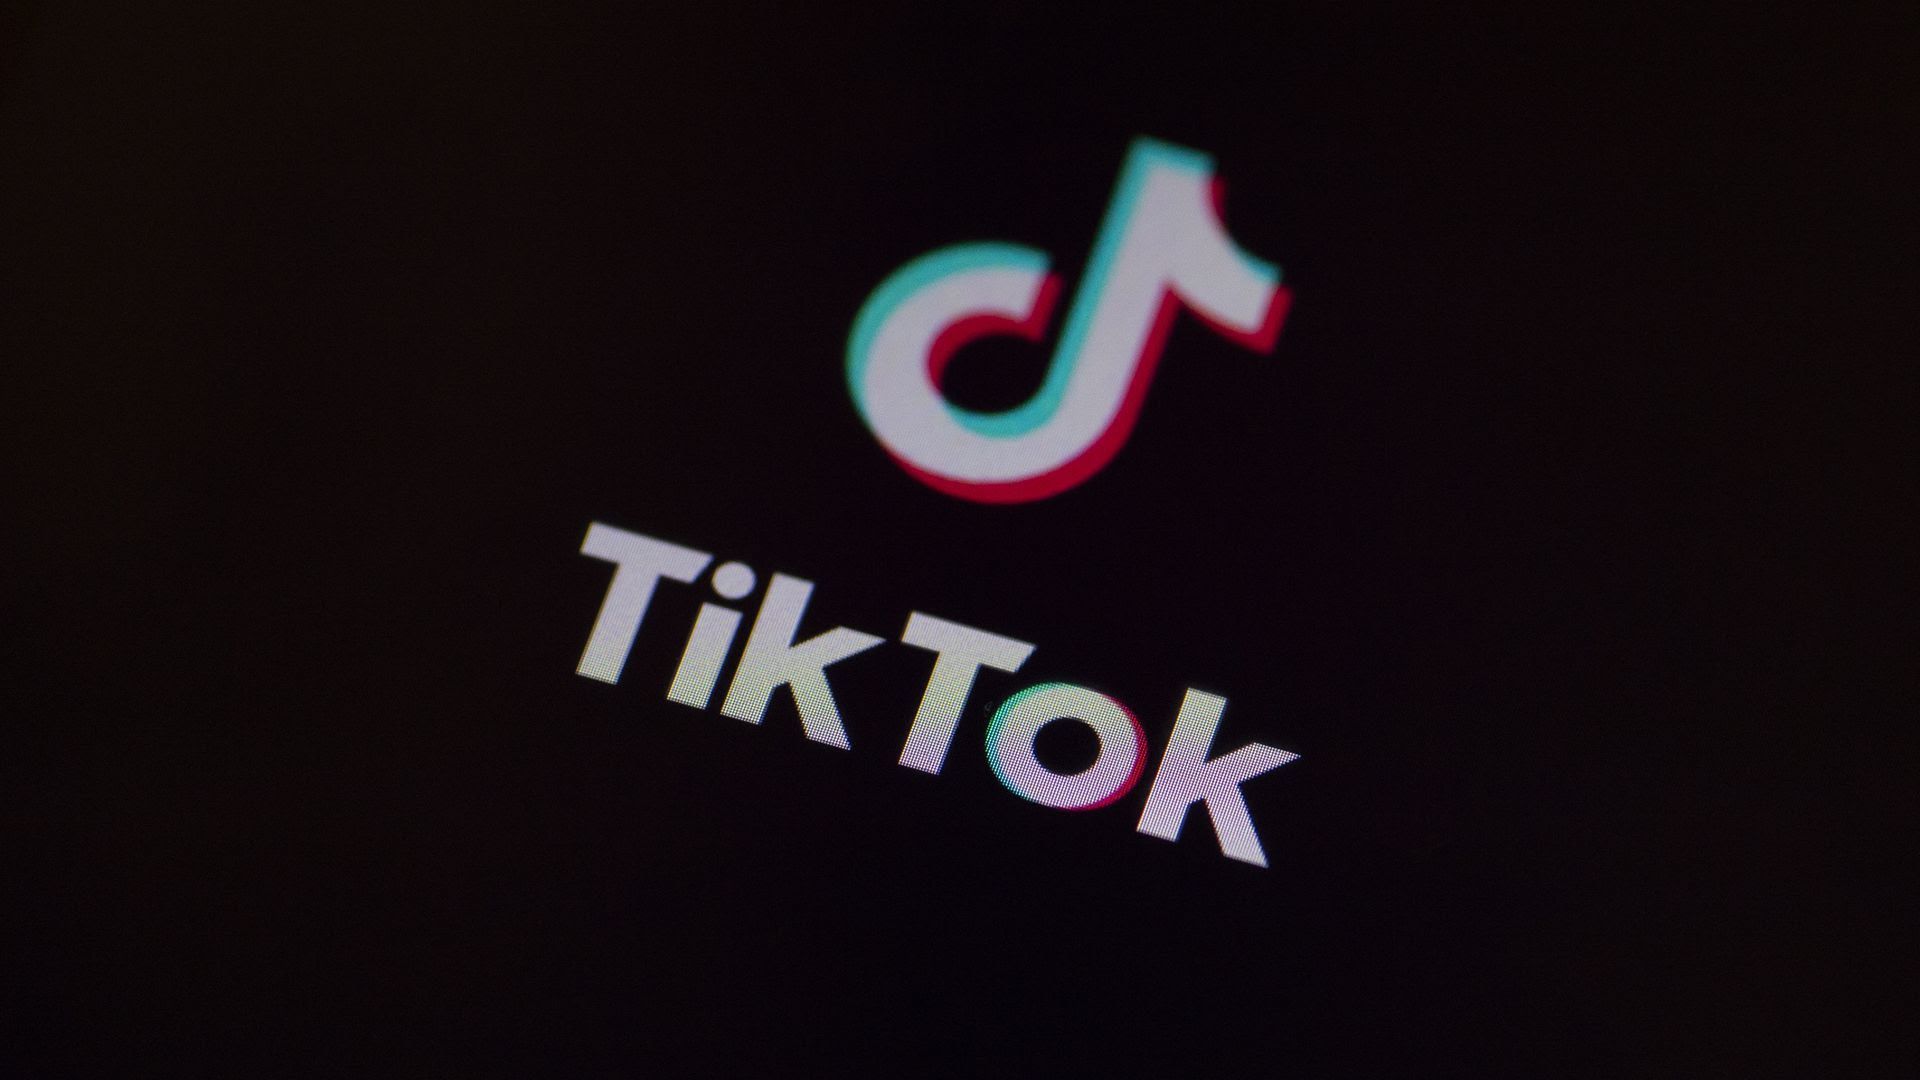 TikTok: Surging Popularity Of Chinese Owned App Lands It In Critics' Crosshairs